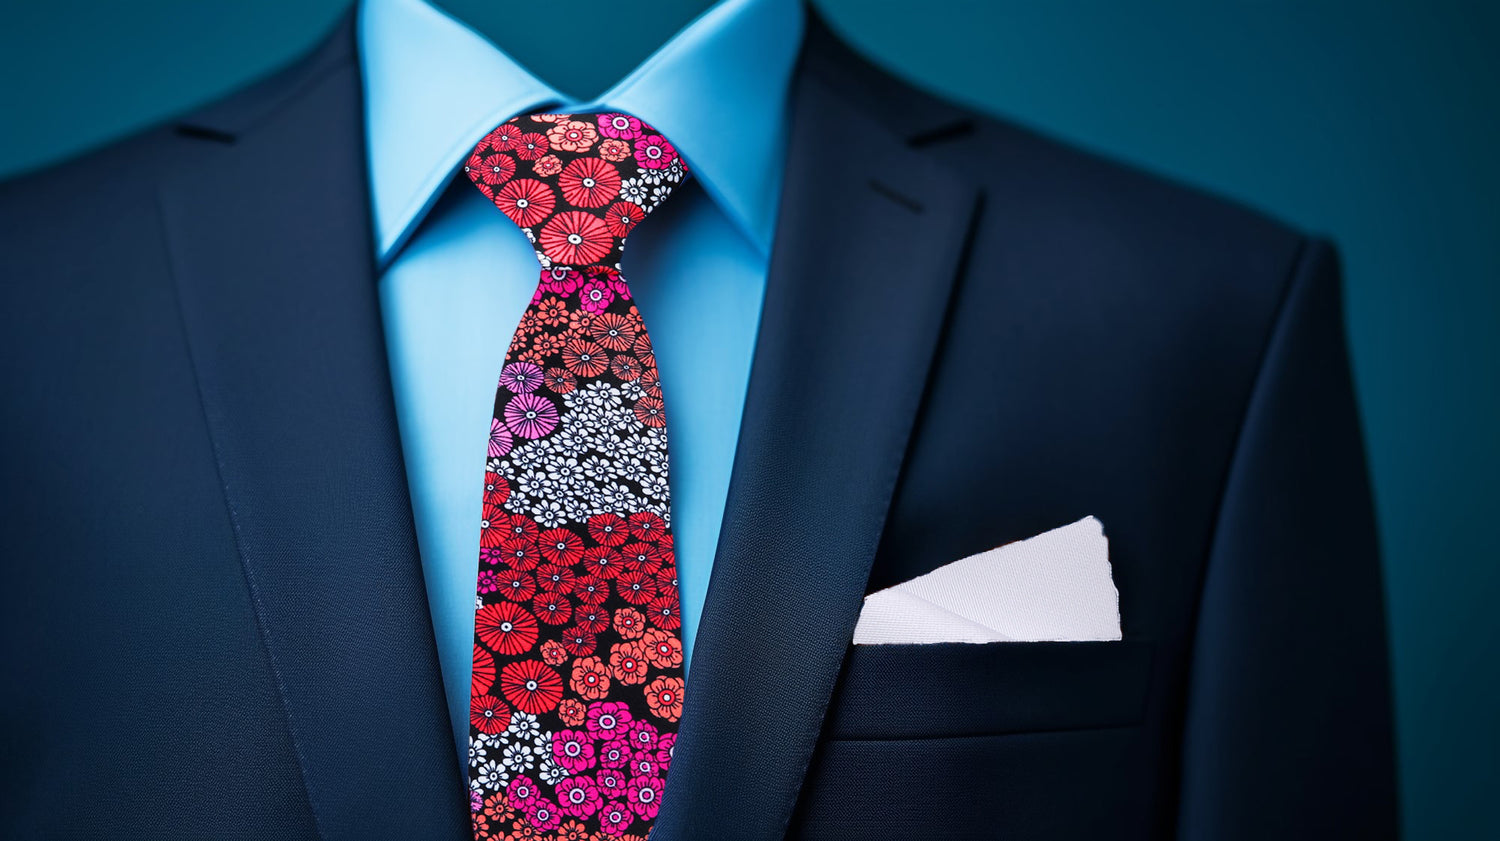 Blue Suit White Square View: Red Pink Orange and White Mixed Flowers Tie